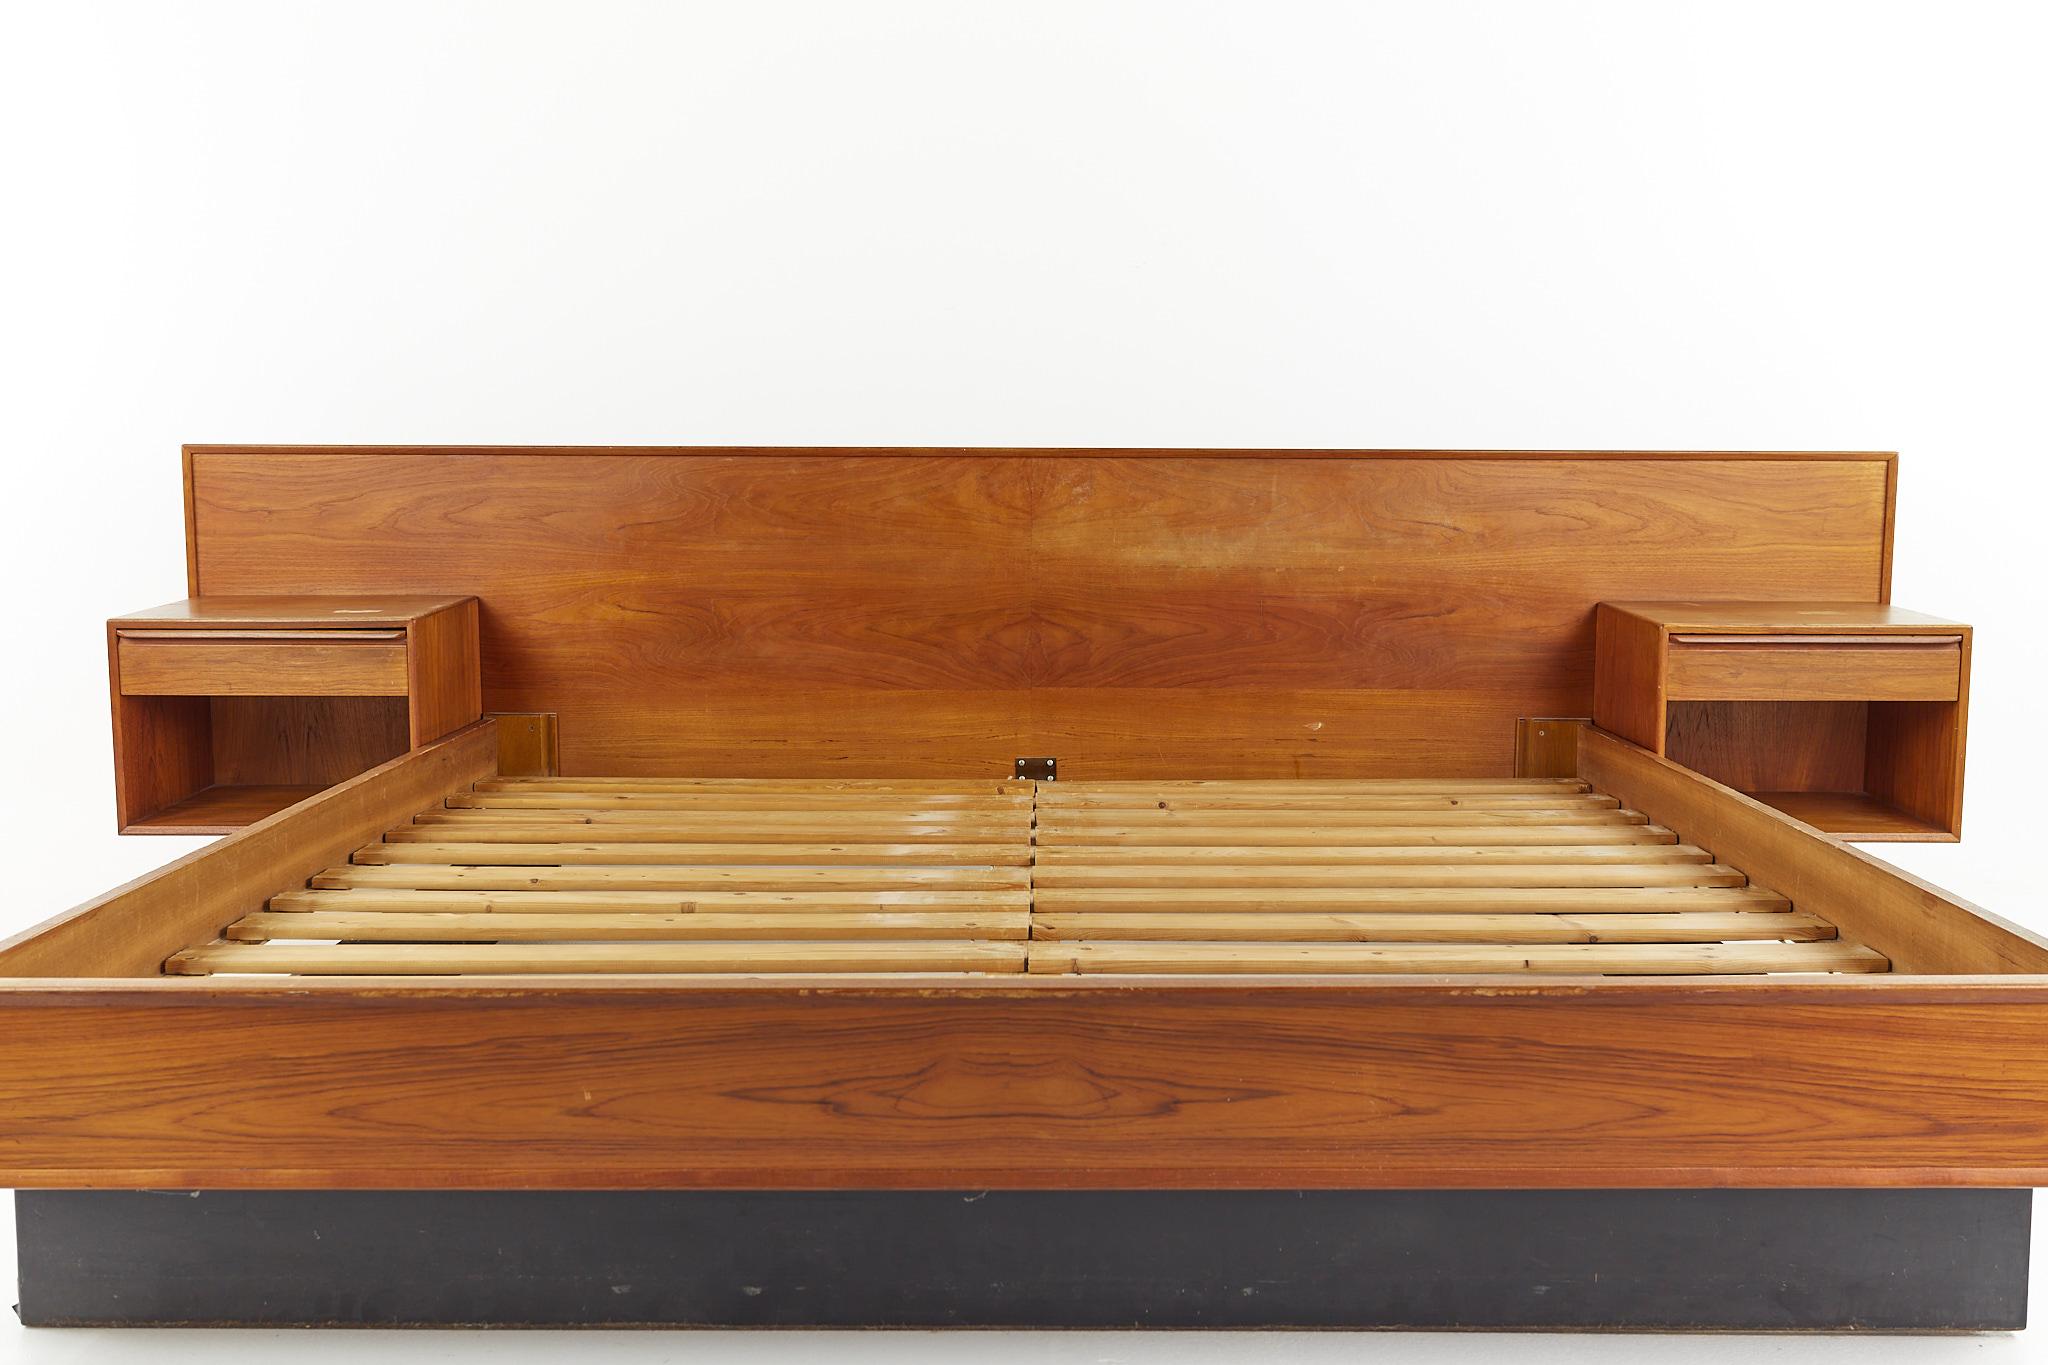 Westnofa mid century teak king platform bed with floating nightstands 

This headboard and nightstands measure: 124 wide x 84 deep x 32.5 inches tall

All pieces of furniture can be had in what we call restored vintage condition. That means the